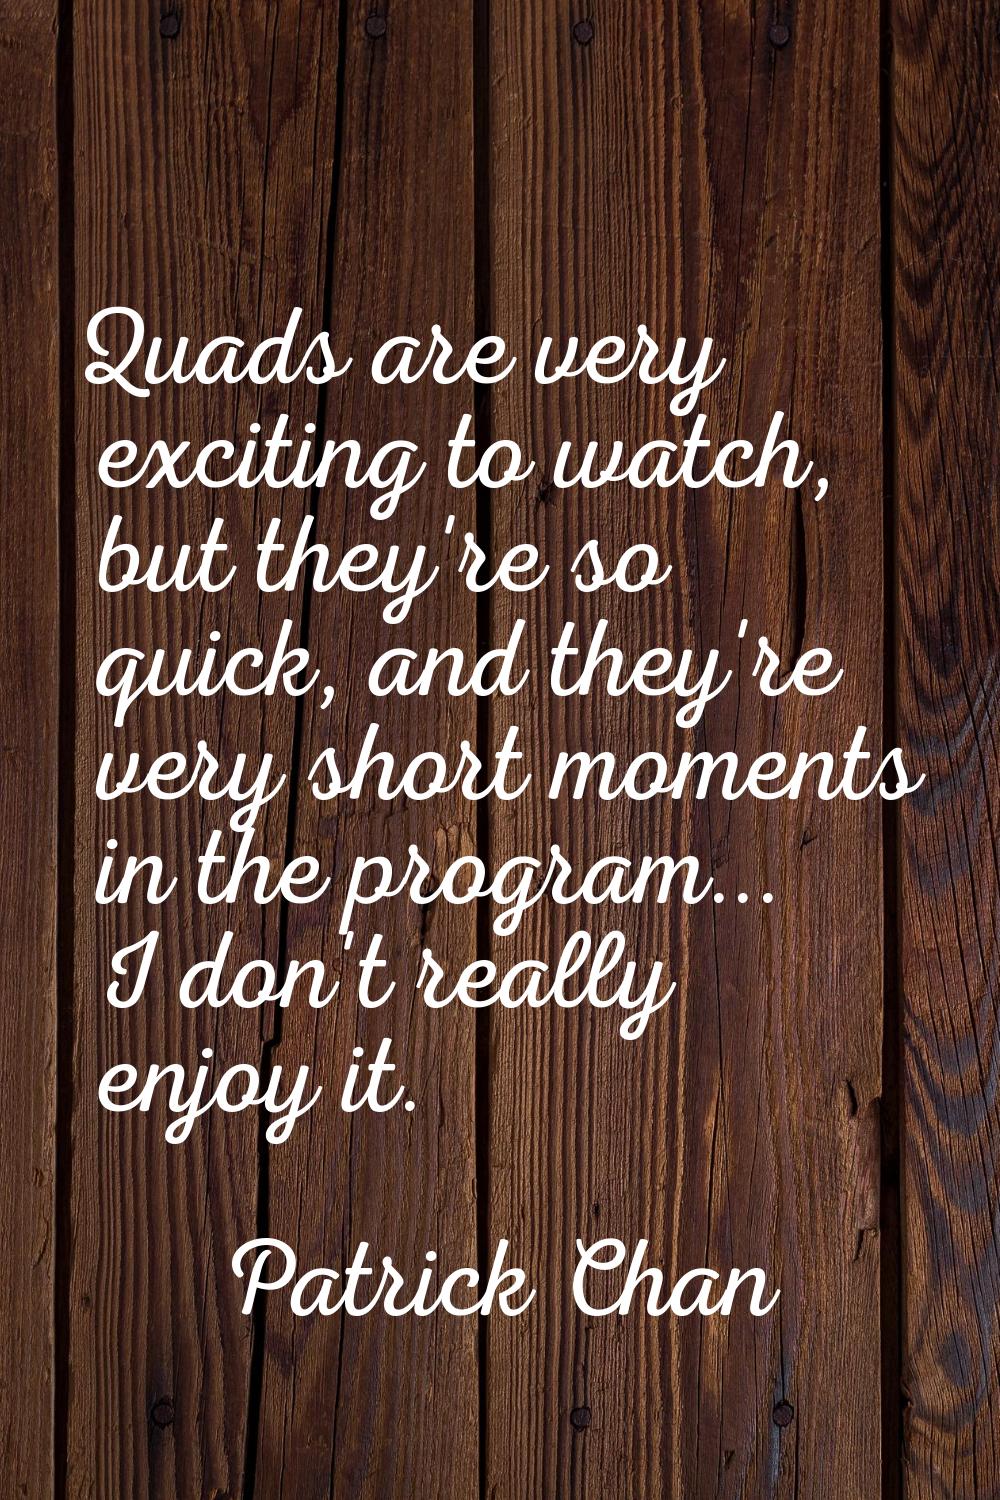 Quads are very exciting to watch, but they're so quick, and they're very short moments in the progr